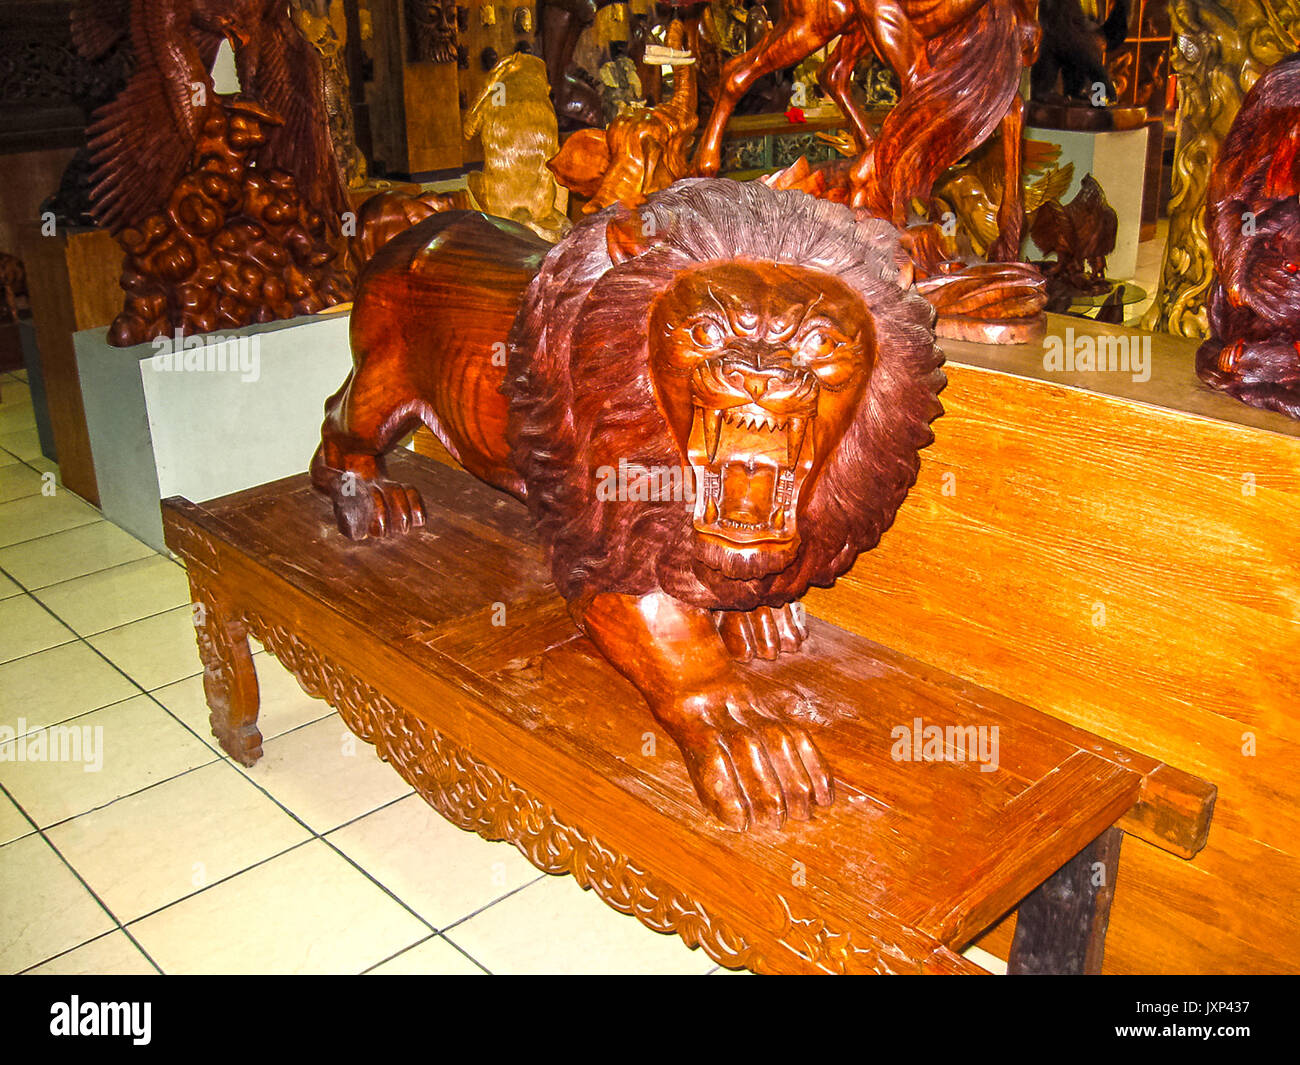 Ubud, Indonesia - April 12, 2012: Carved wooden animal statues in shop Stock Photo